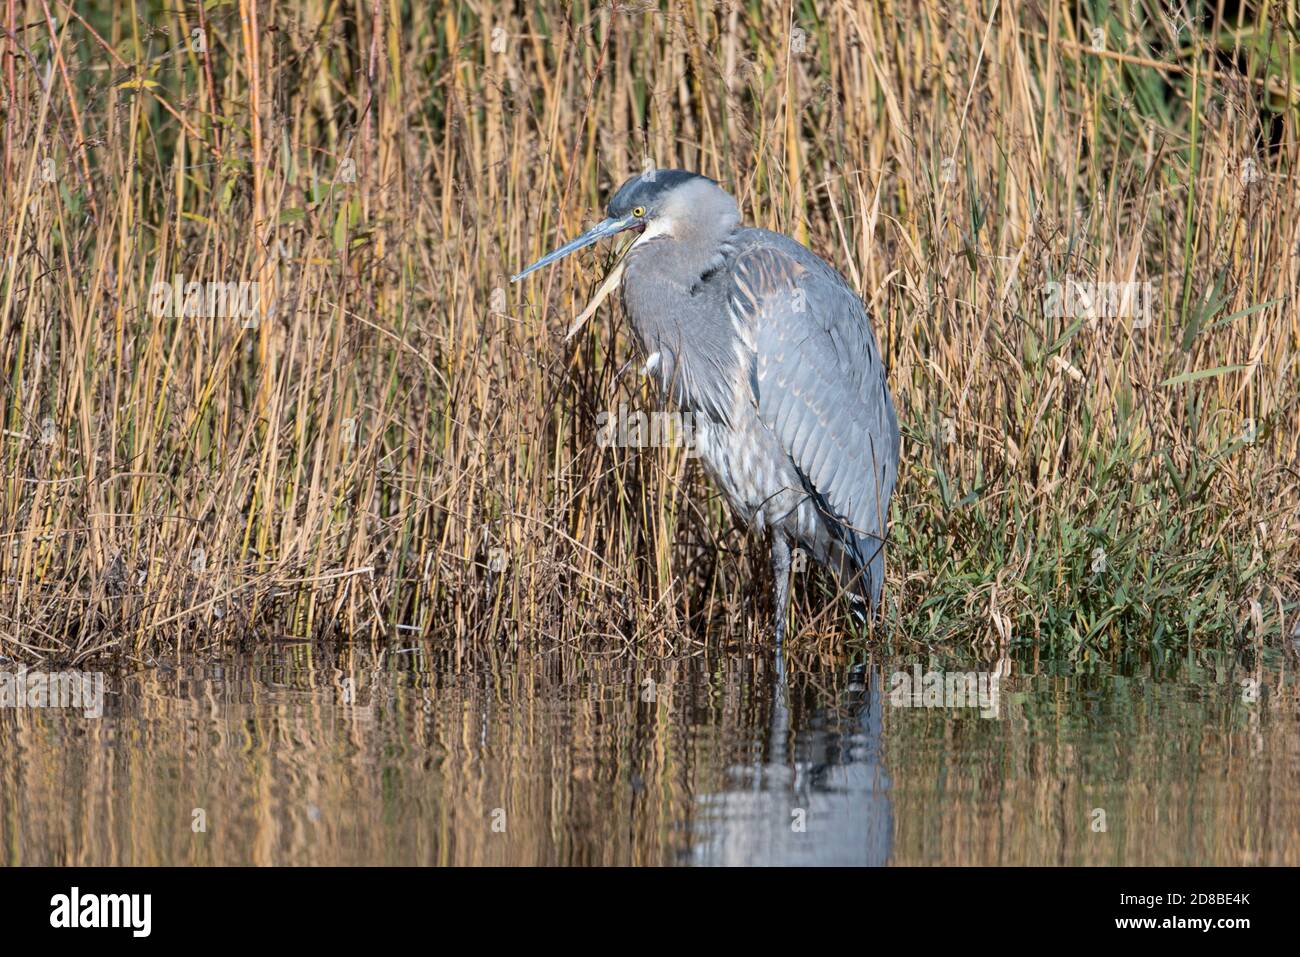 Great blue heron stands in shallow water next to weeds at Cannon Hill Park in Spokane, Washington USA. Stock Photo